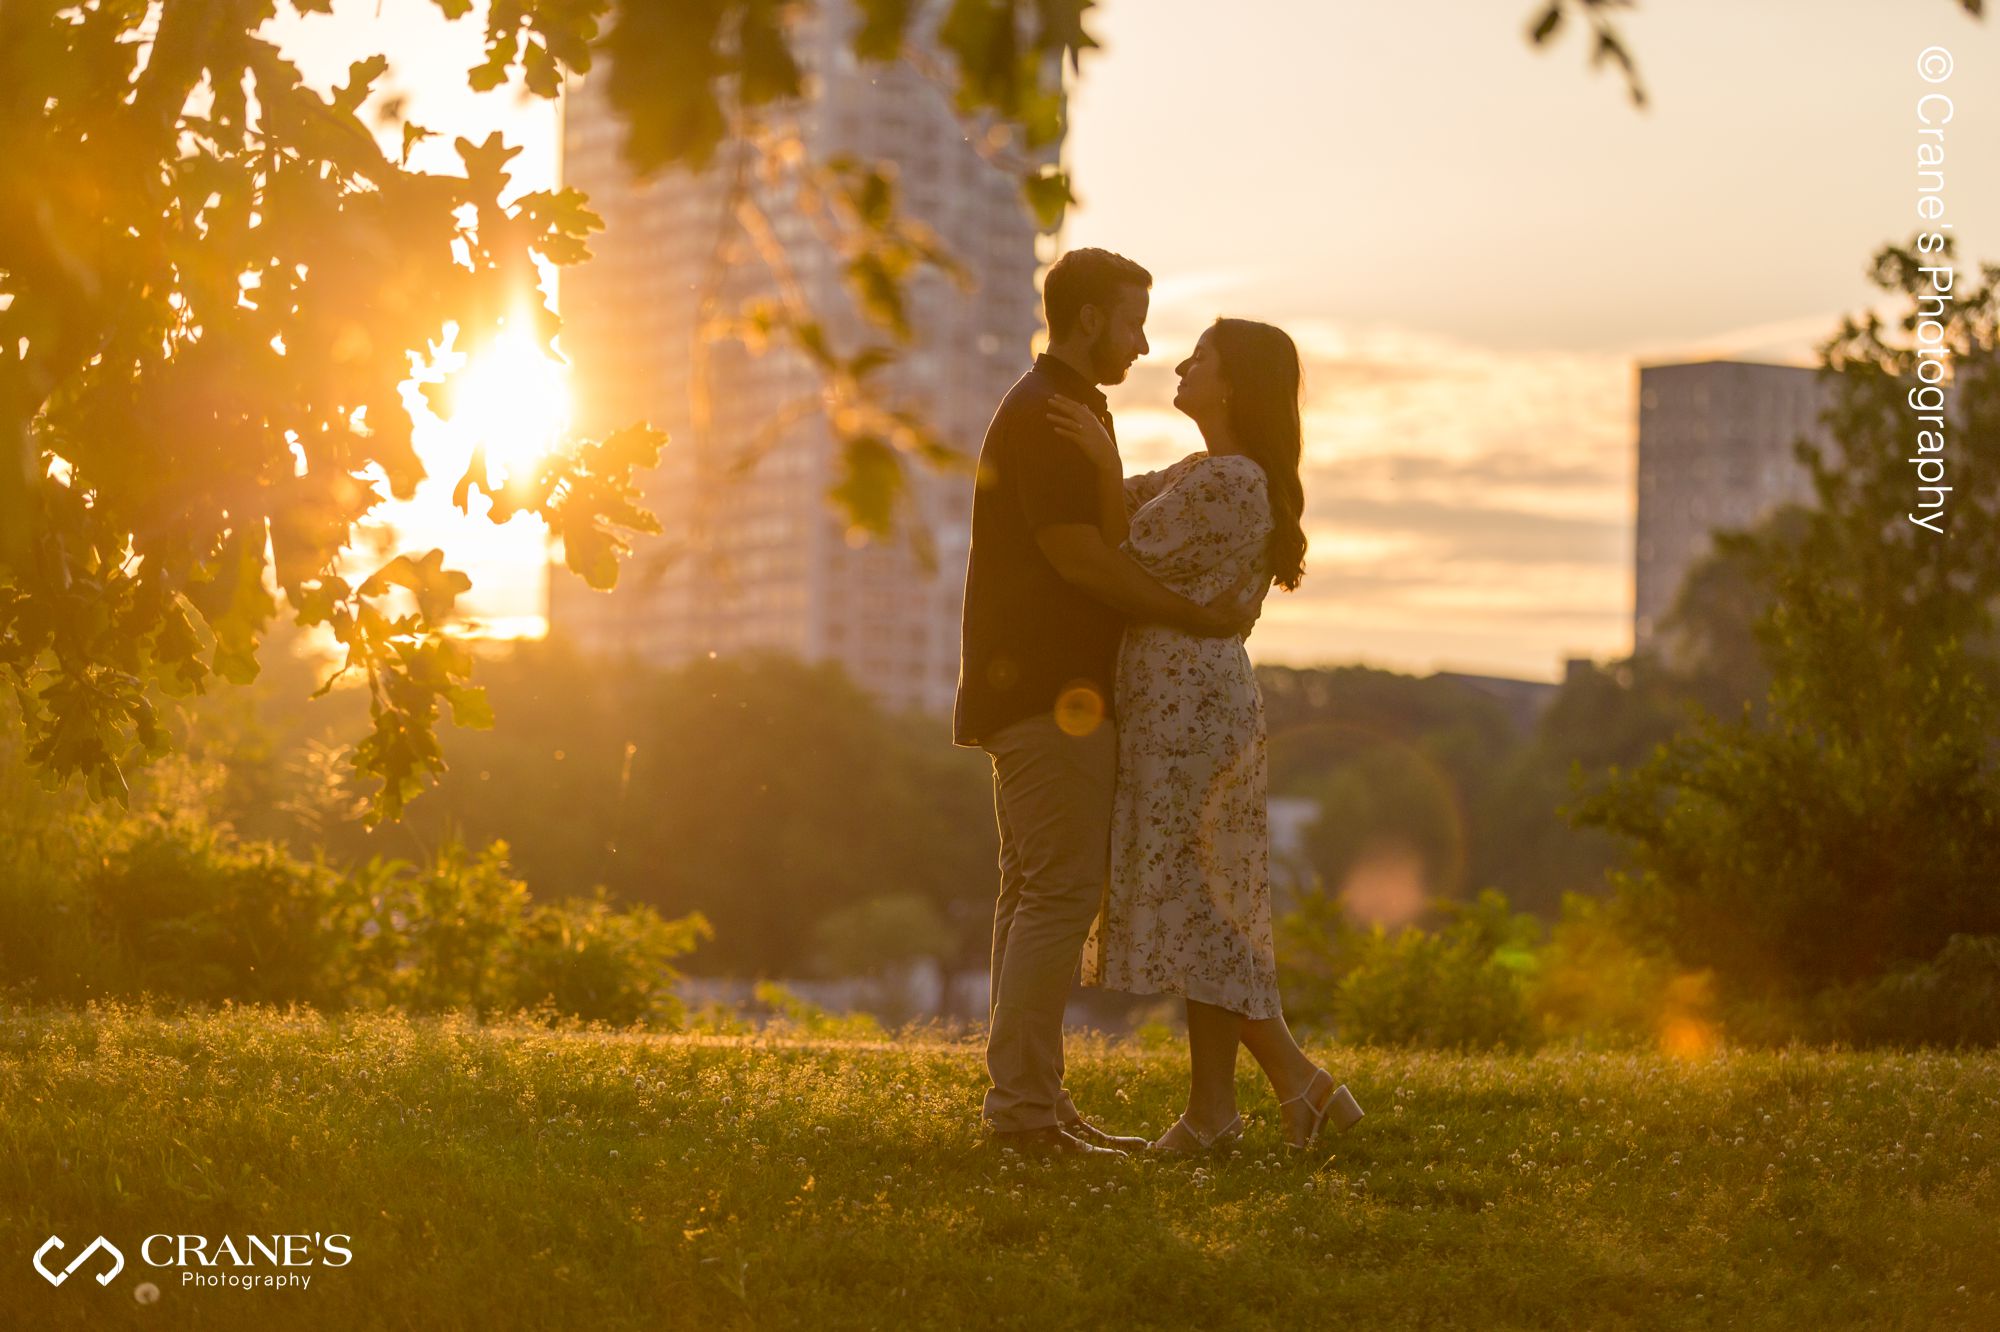 A sunset engagement session photo during the golden hour at Lincoln Park